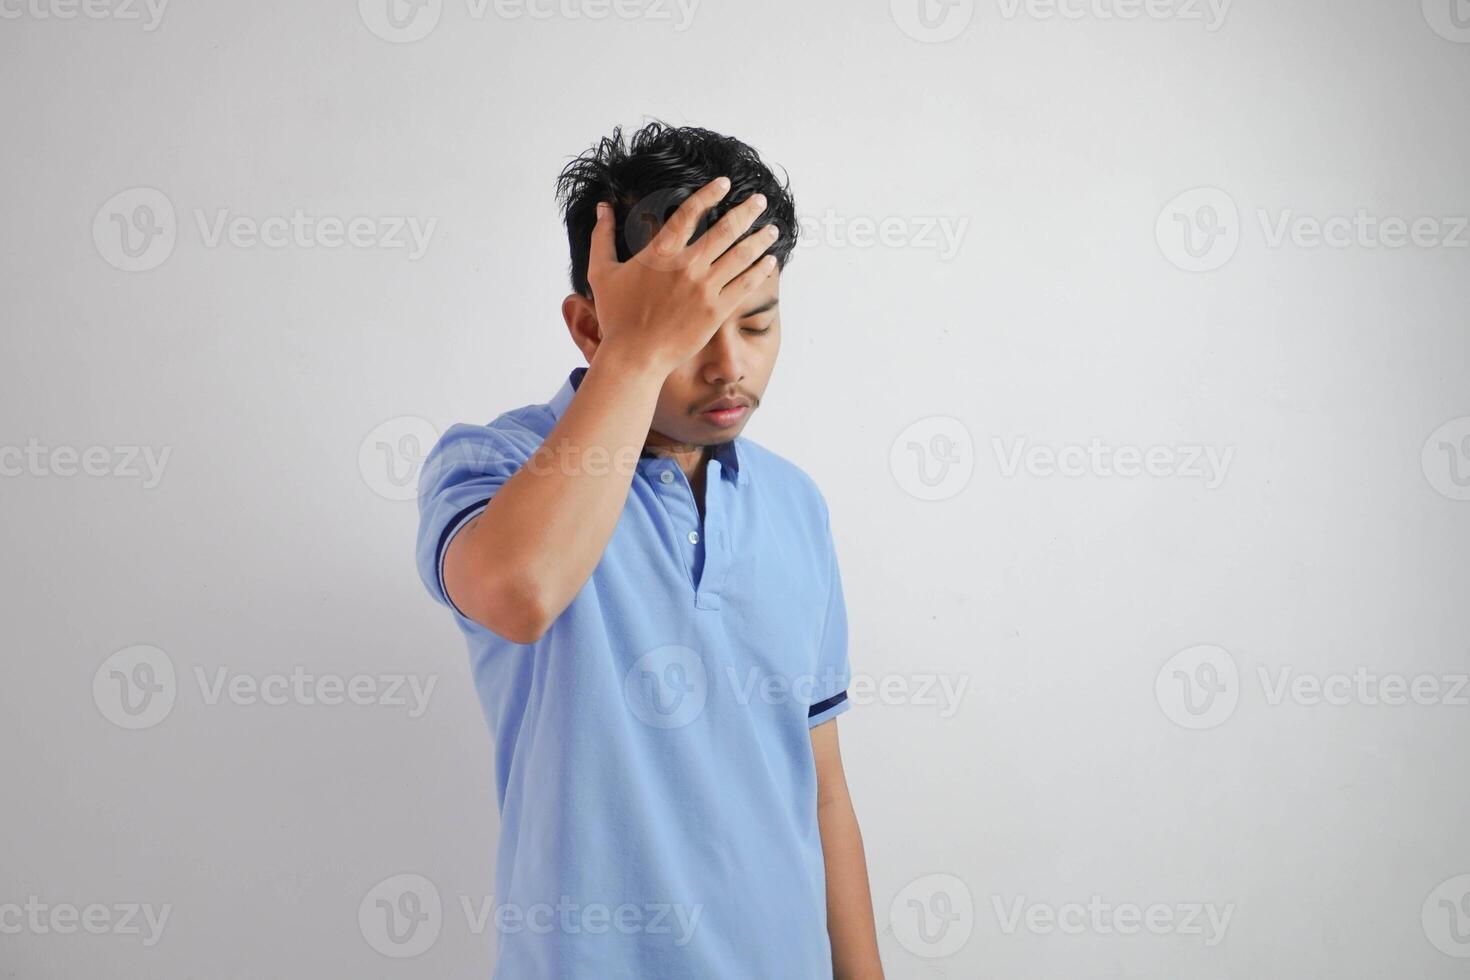 dizziness or stress portrait young asian man holding head wearing blue polo t shirt isolated on white background photo